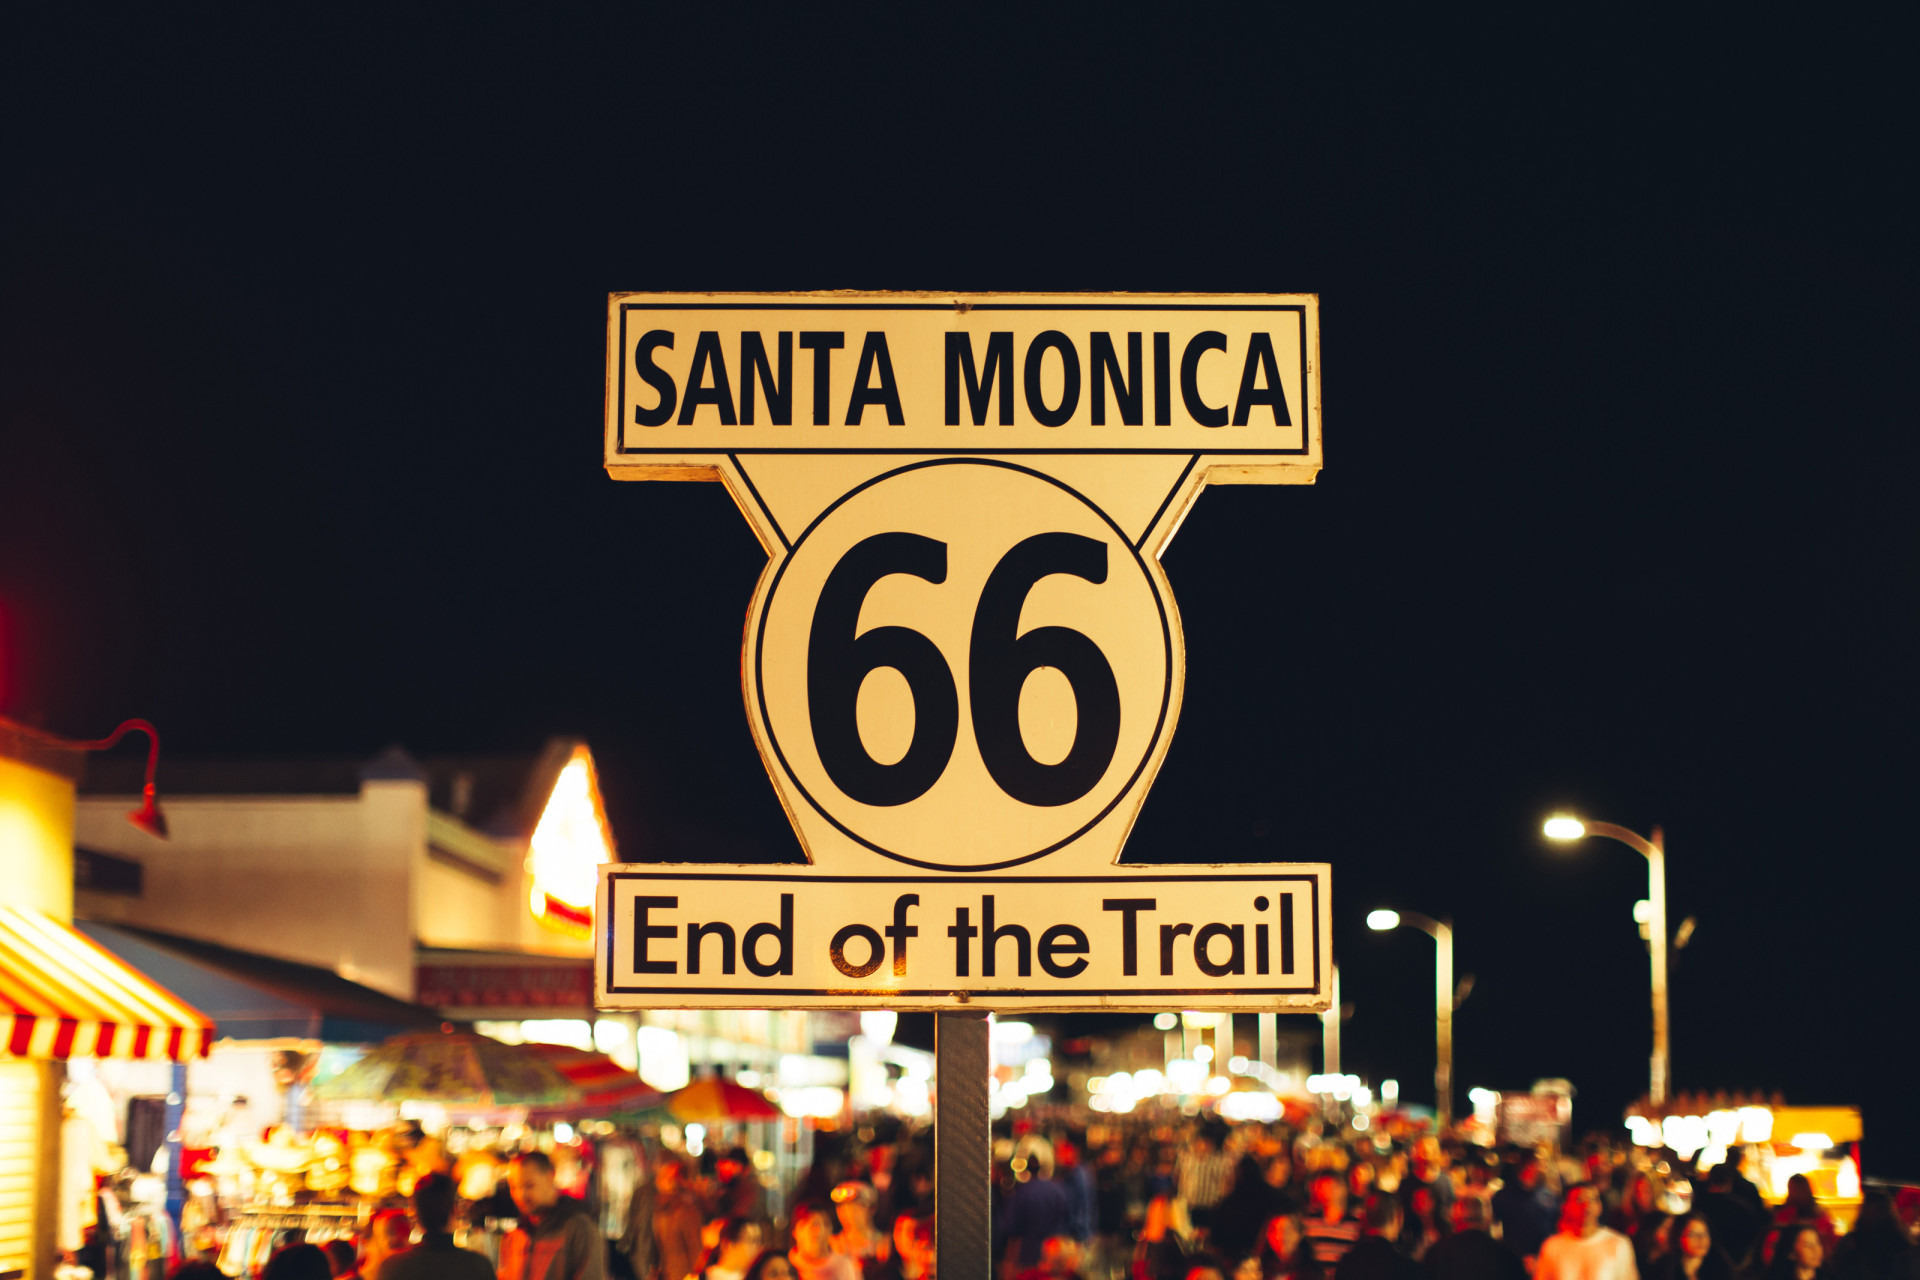 <p>End of the Trail: Route 66 concludes in Los Angeles, with the Santa Monica pier in the background.</p> <p>See also: <a href="https://www.msn.com/en-us/news/other/these-cities-could-disappear-by-2030-due-to-rising-sea-levels/ss-AA1n7l9w?disableErrorRedirect=true&infiniteContentCount=0"><span>These cities could disappear by 2030 due to rising sea levels</span></a> </p>